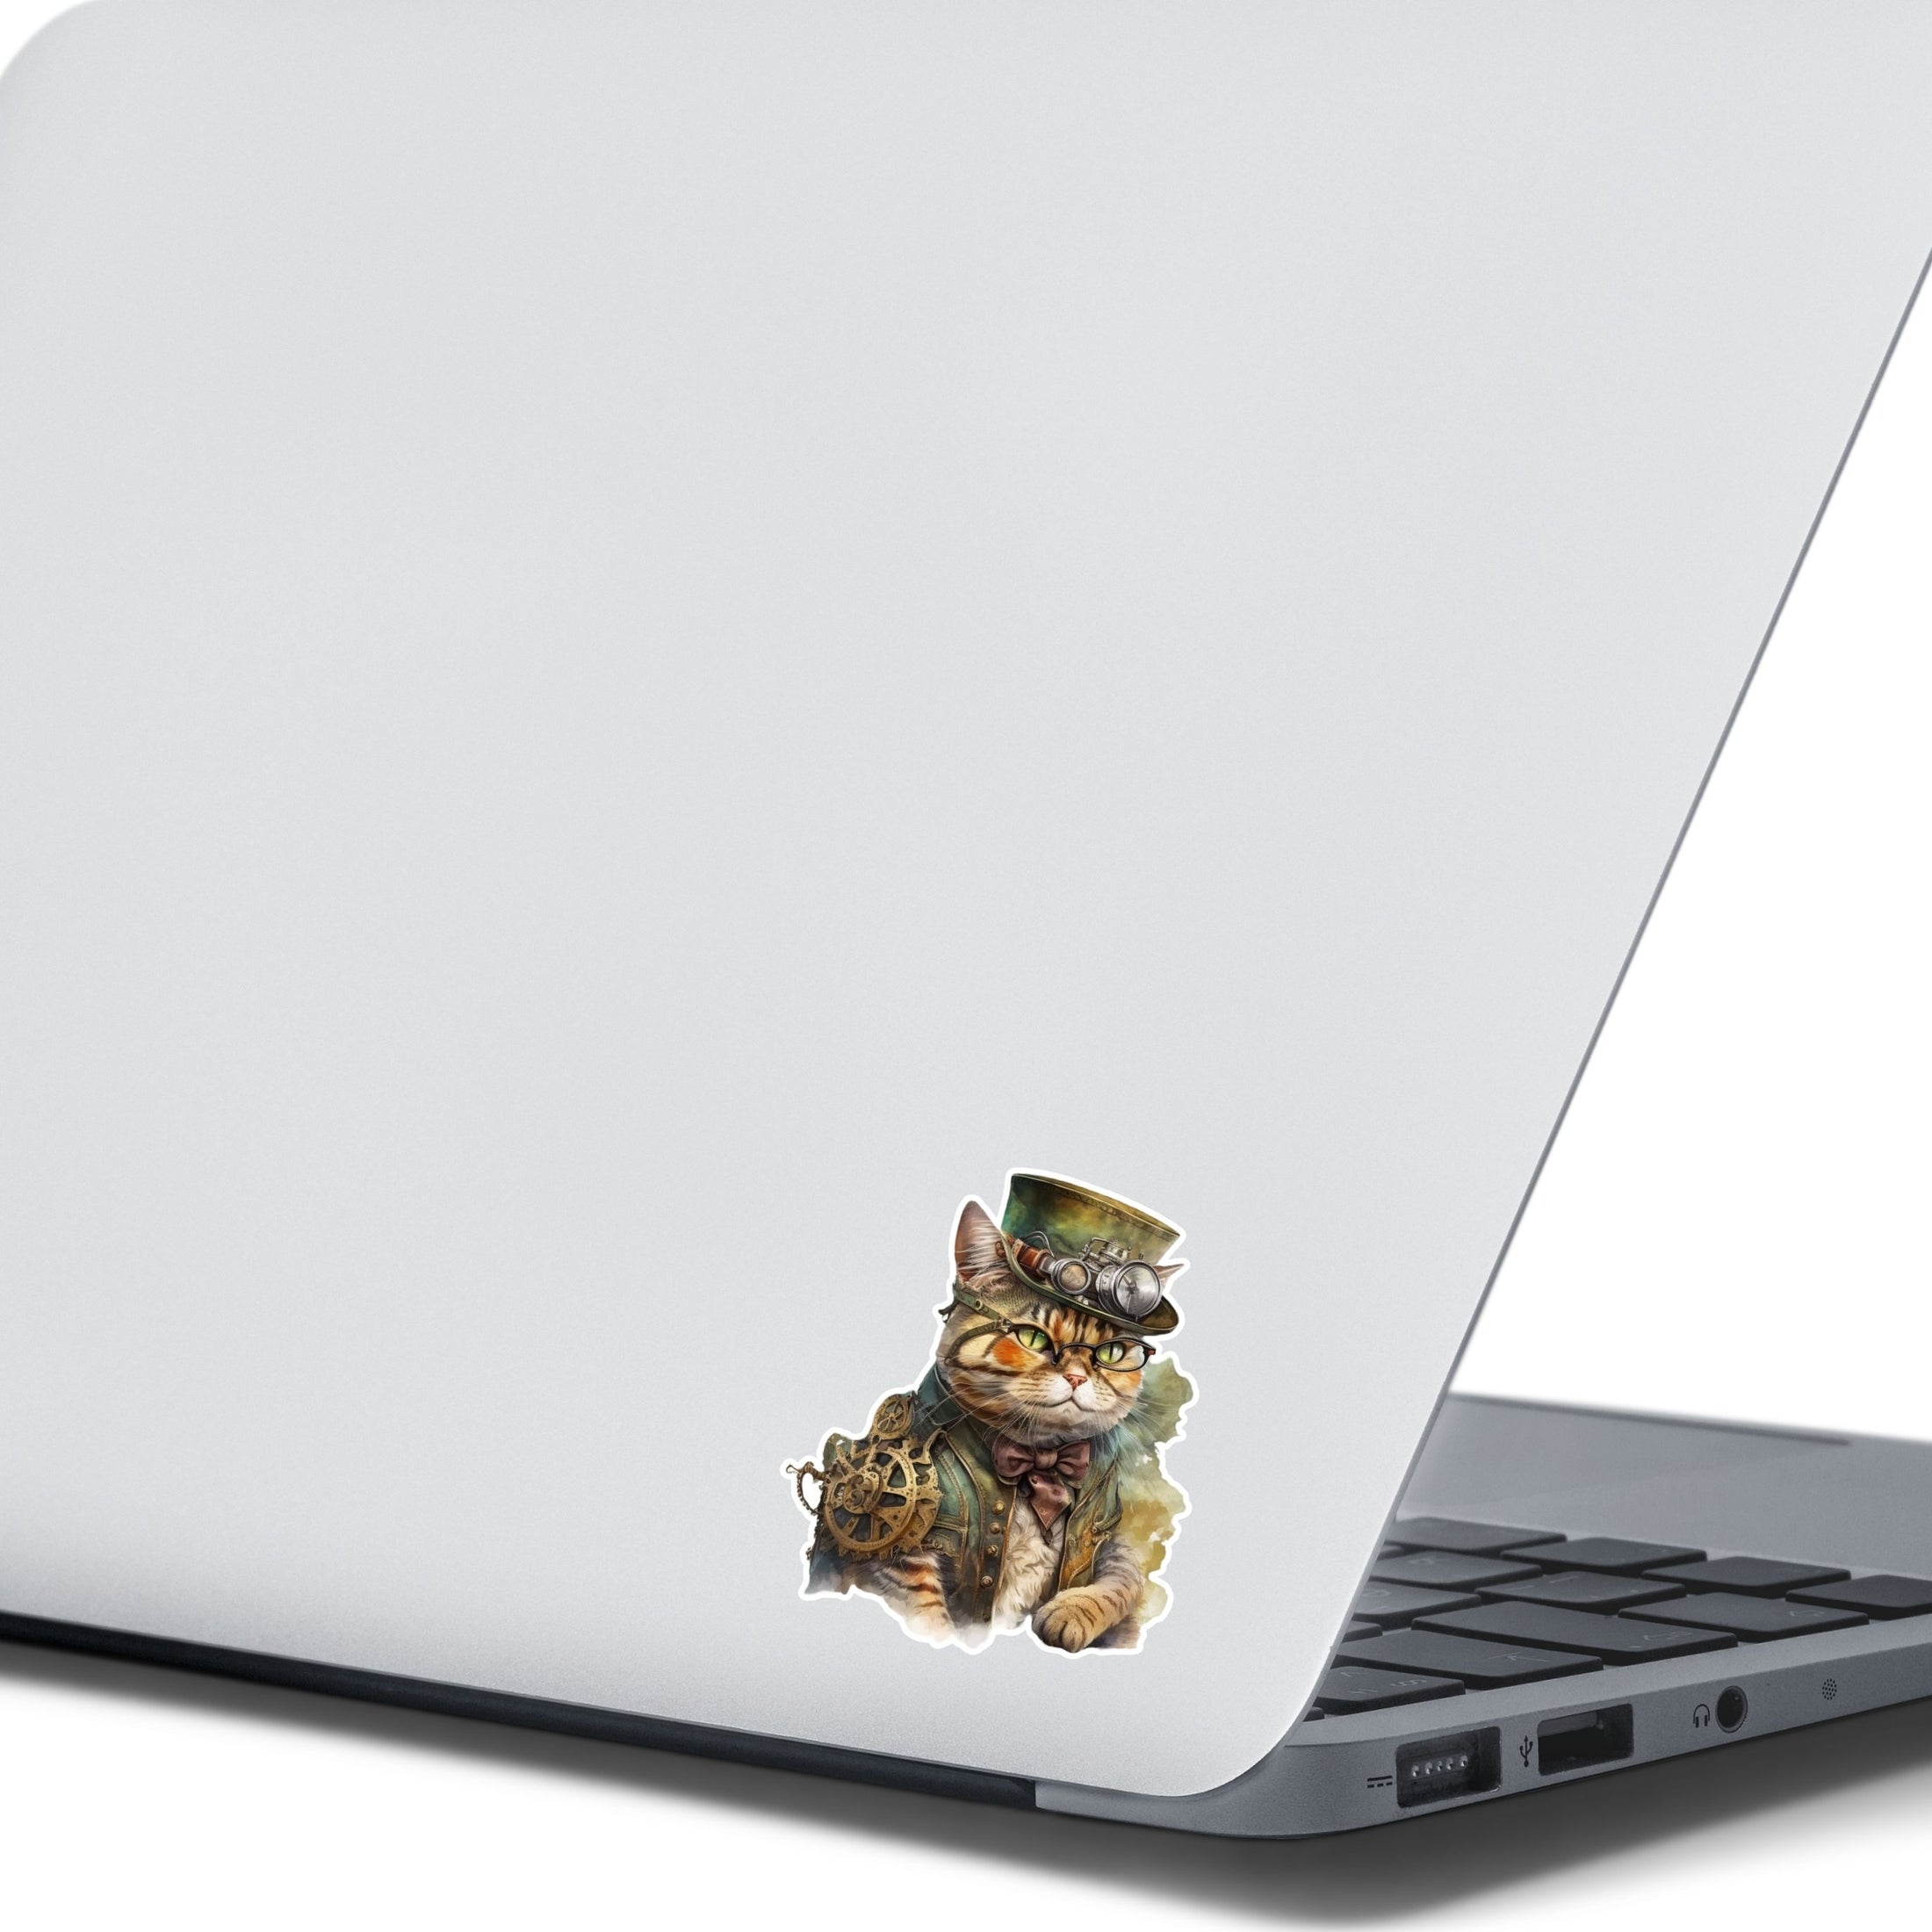 This image shows the steampunk cat sticker on the back of an open laptop.